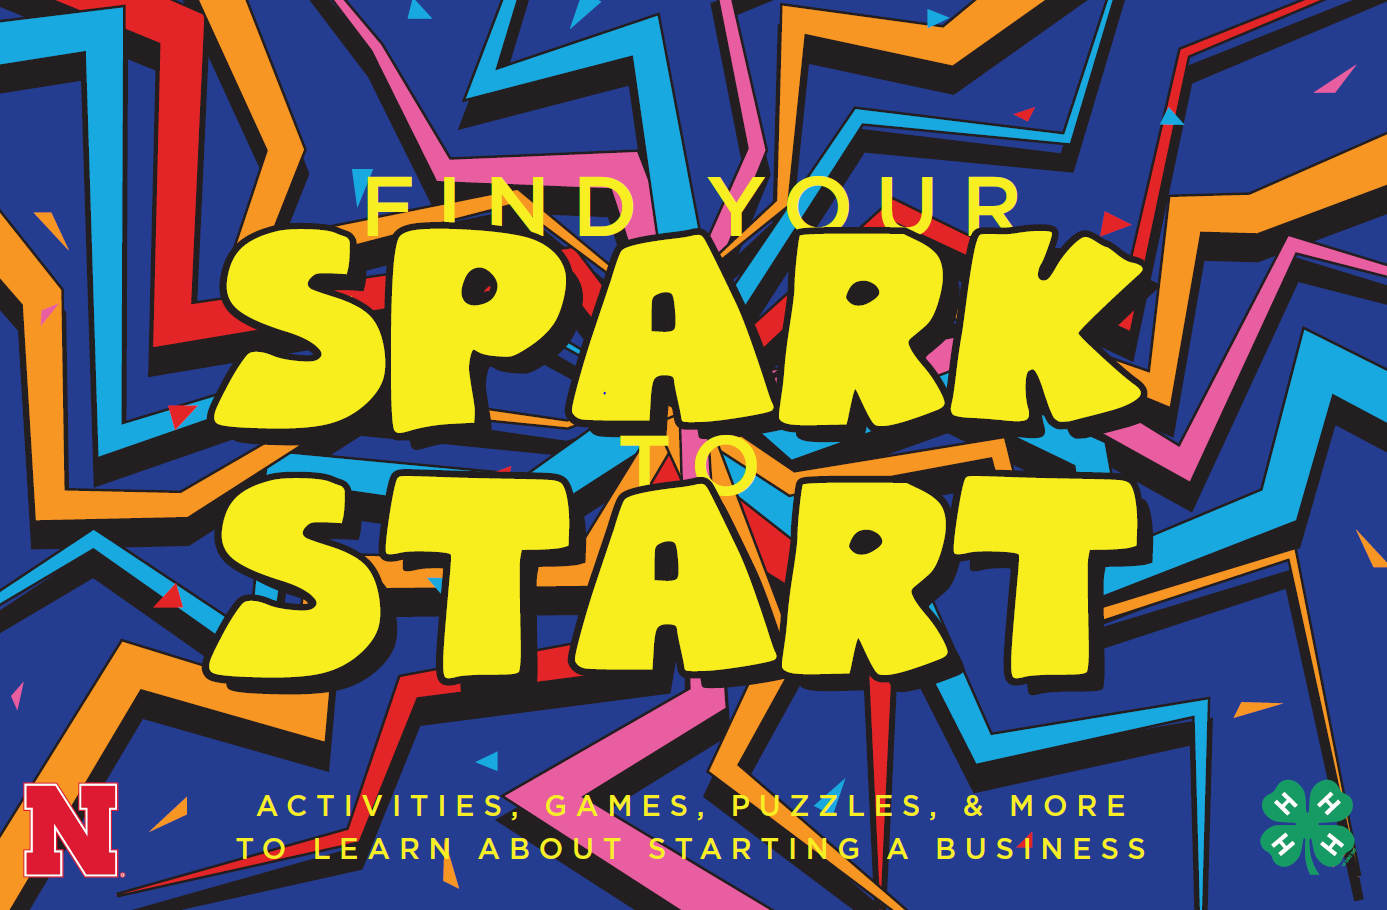 Find Your Spark to Start